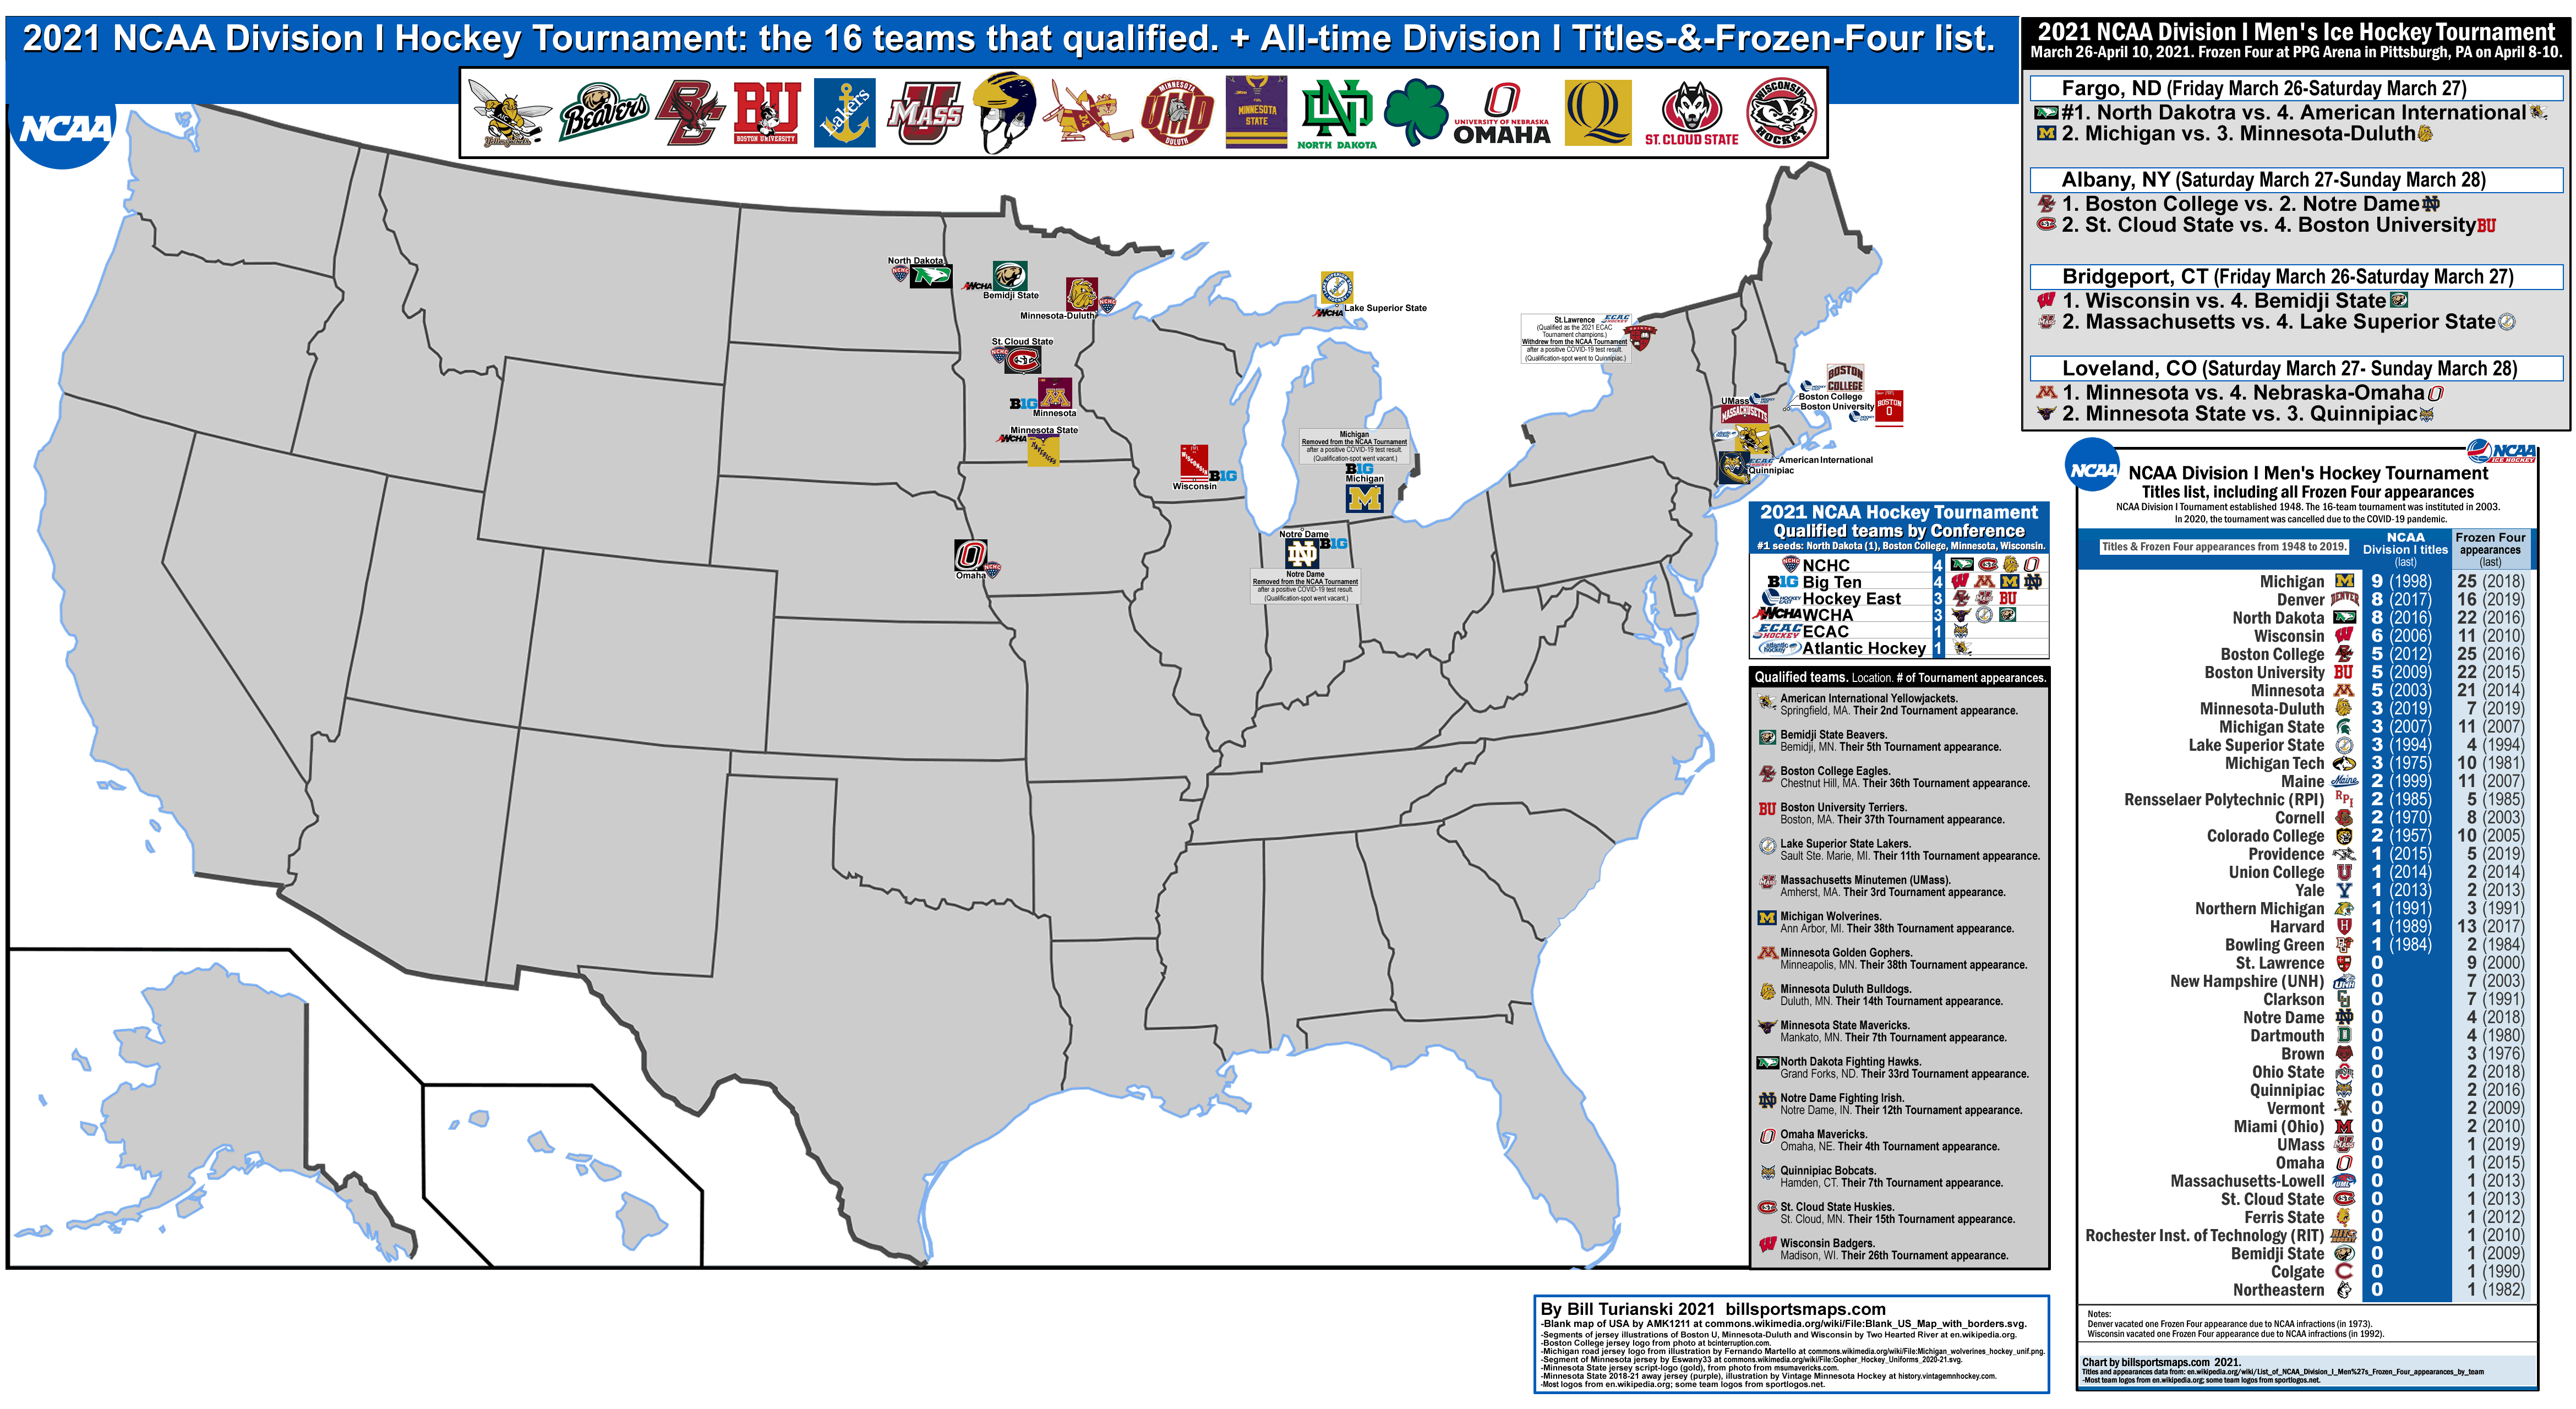 File:NHL teams and conferences map - 2017-18.svg - Wikimedia Commons